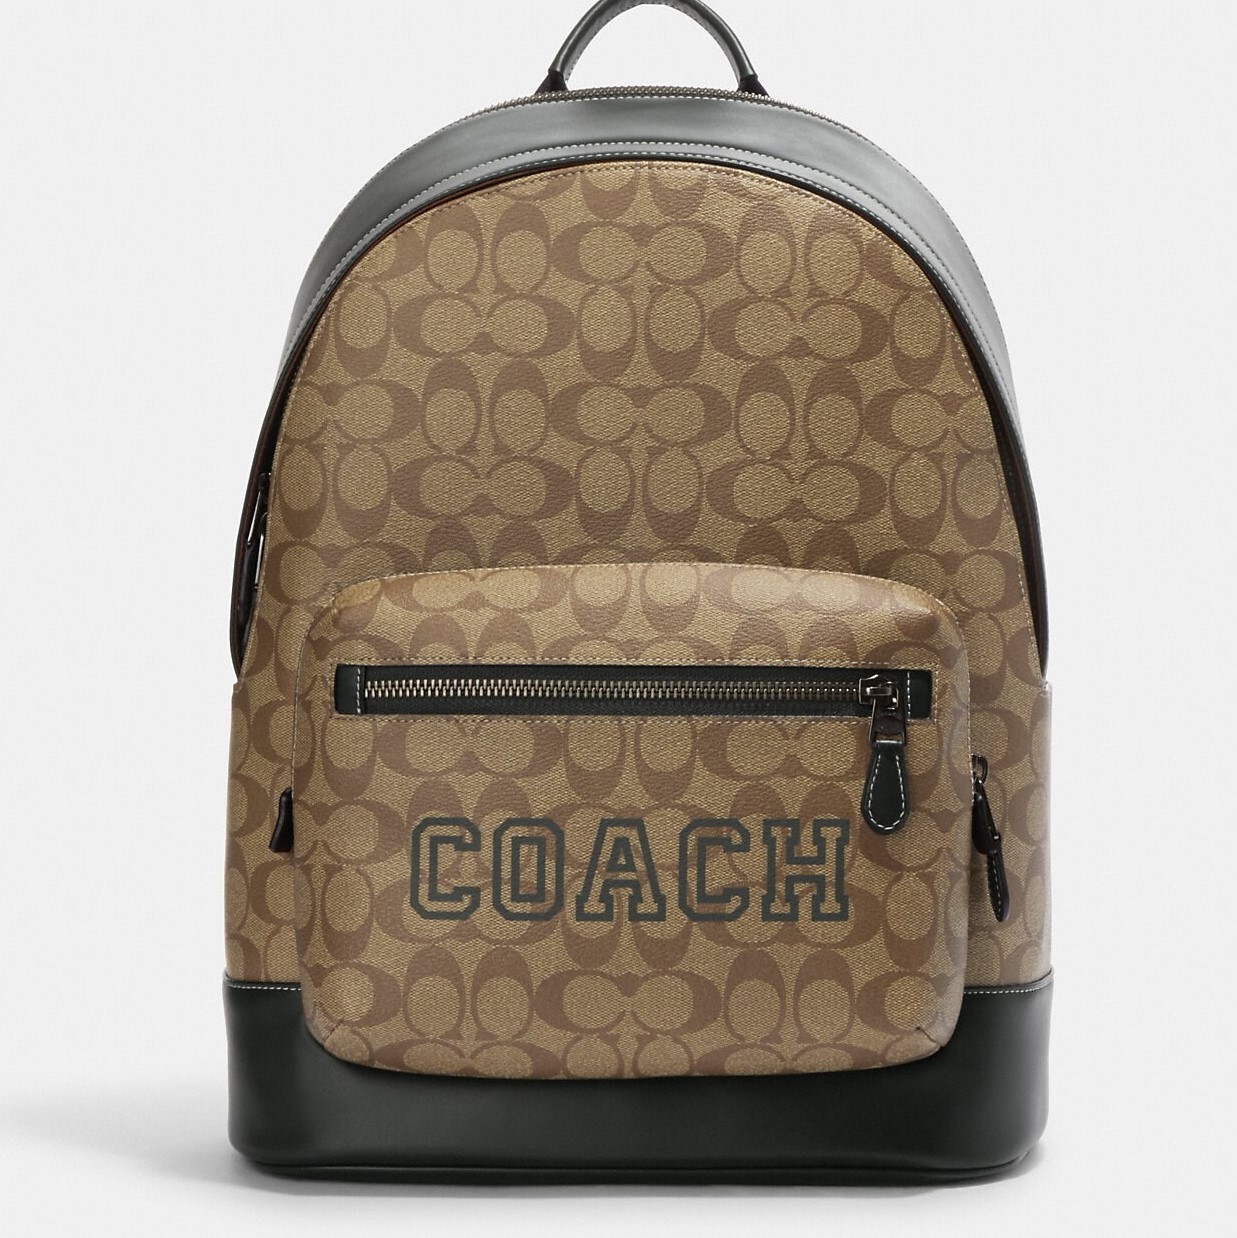 BALO COACH NAM SIZE LỚ4N WEST BACKPACK IN SIGNATURE CANVAS WITH VARSITY MOTIF CE717 